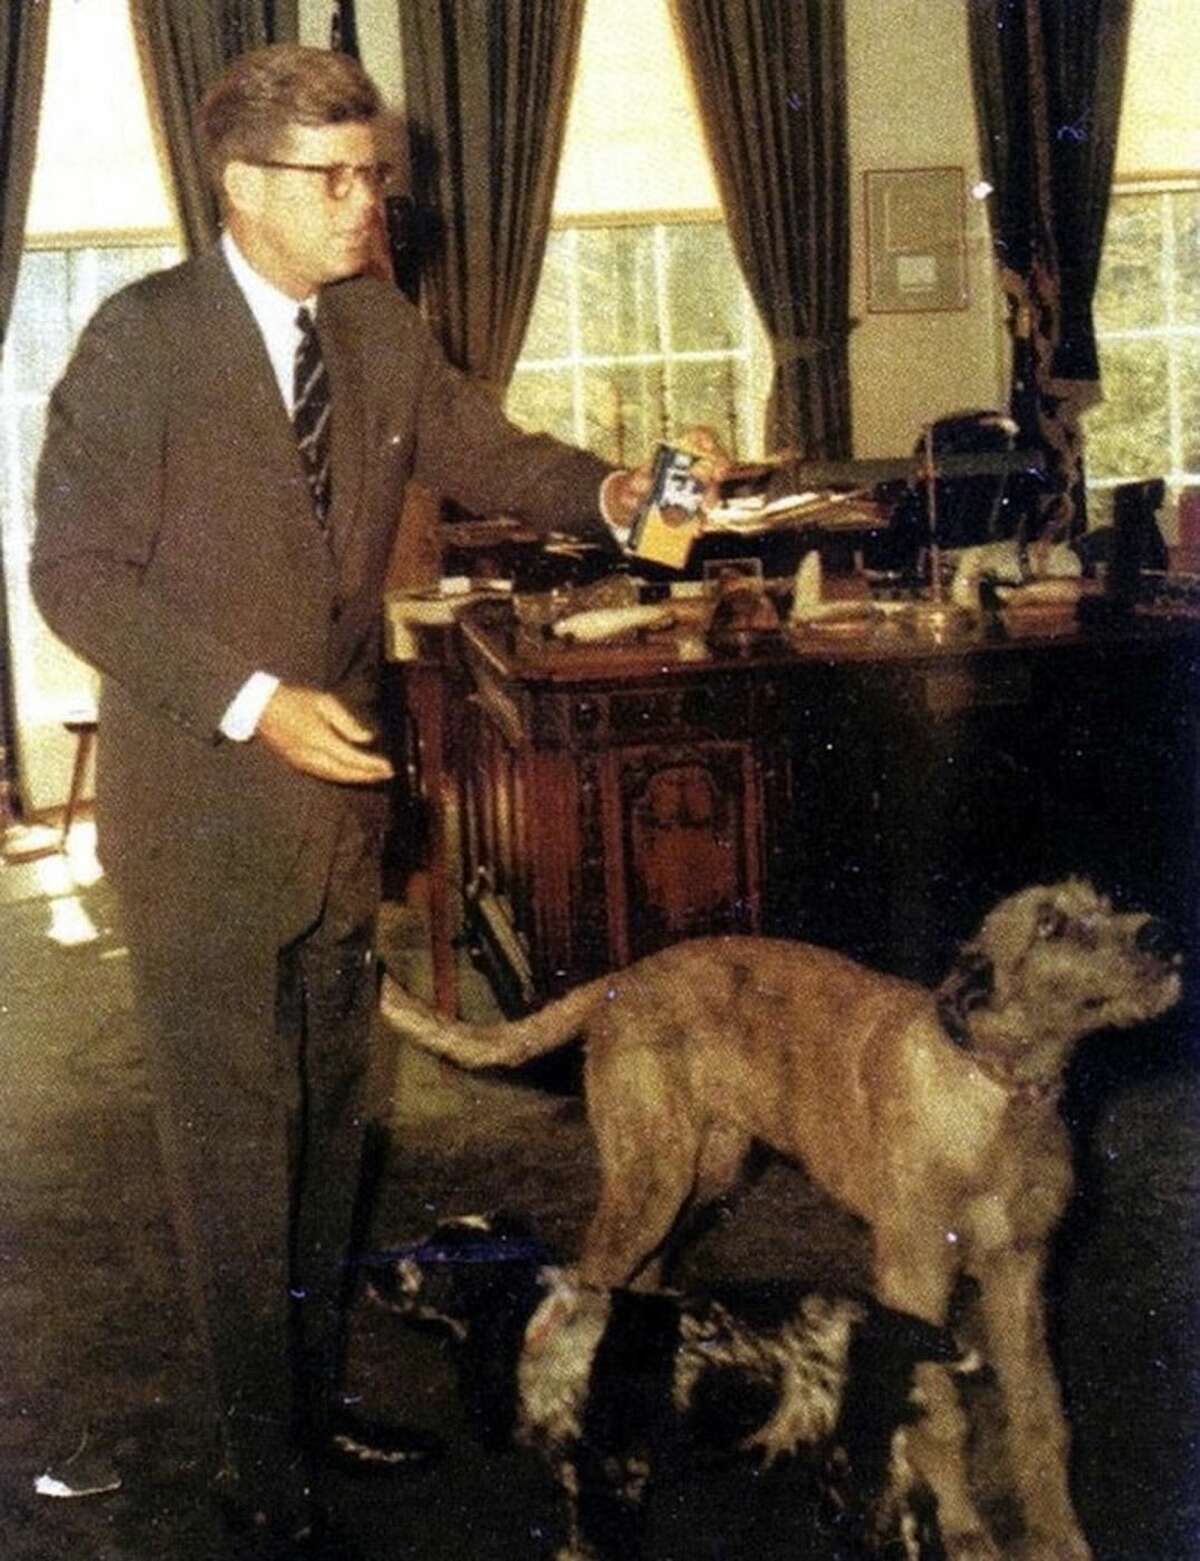 JFK with Wolf and Shannon in the Oval Office.